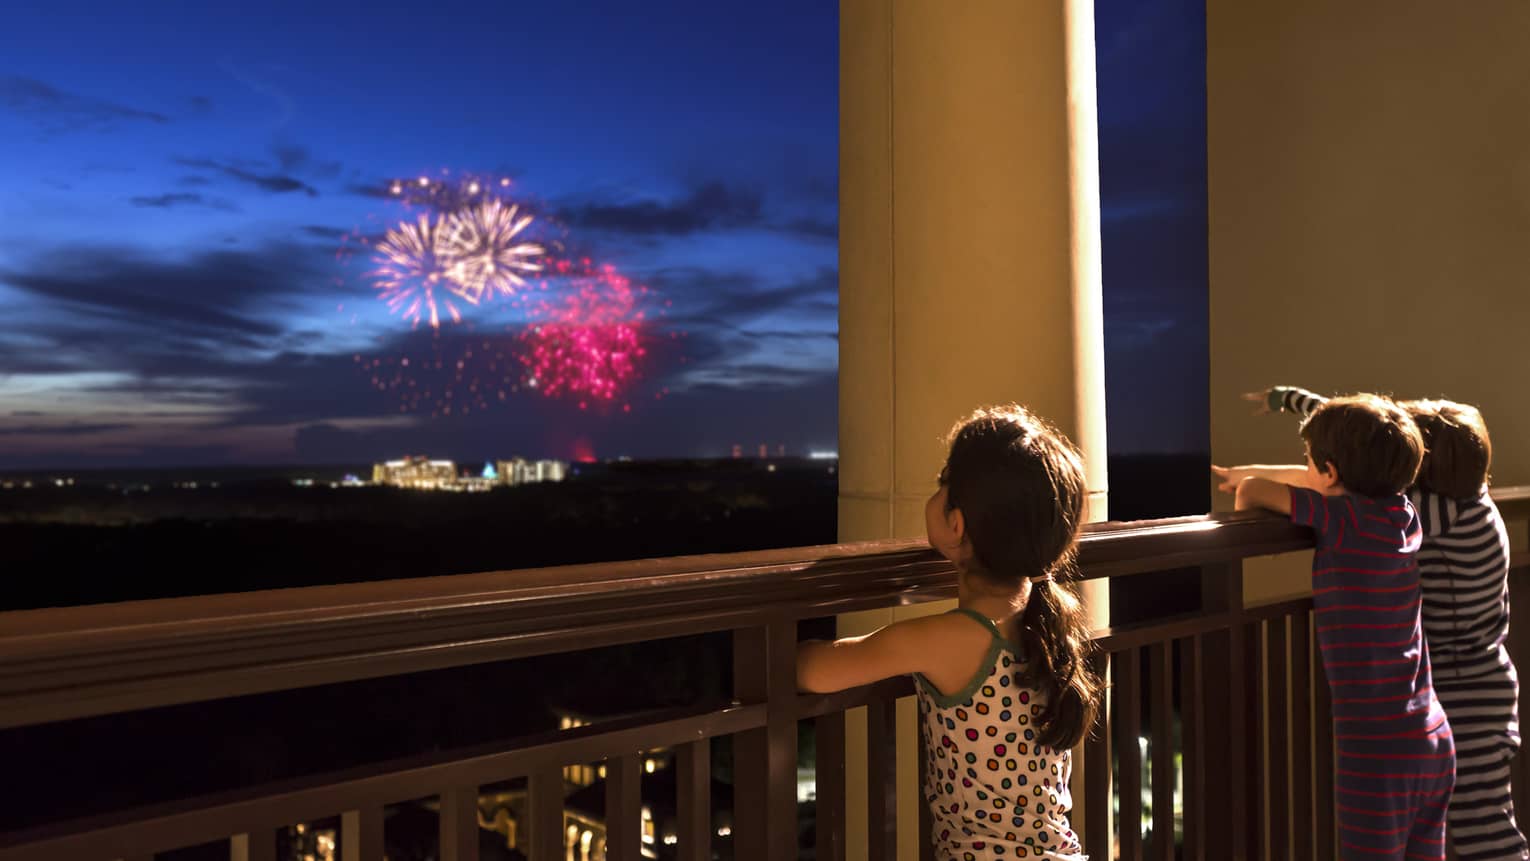 Young girl stands on Four Seasons Hotel balcony, watches colourful fireworks display over Walt Disney World resort